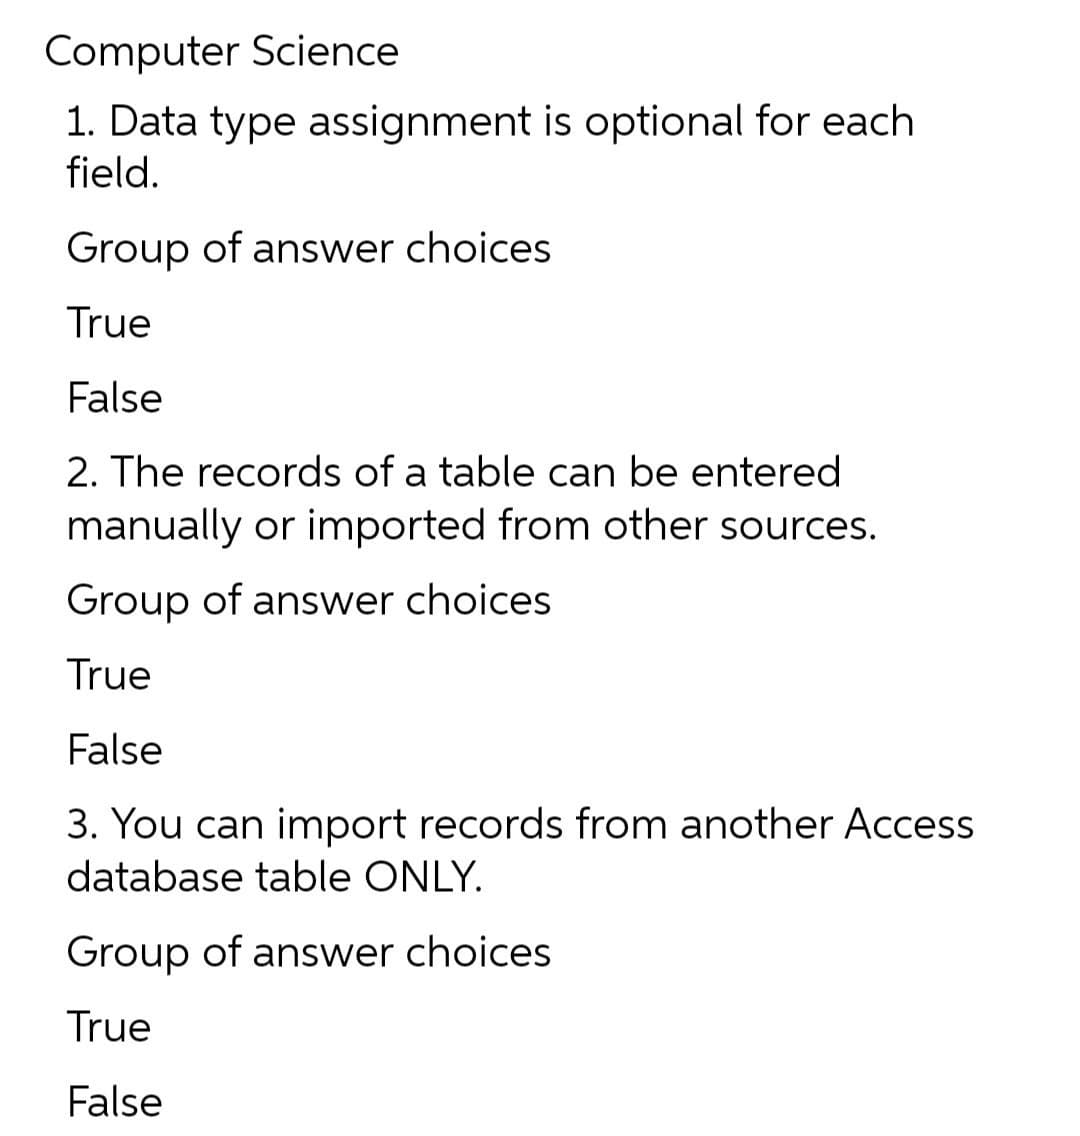 Computer Science
1. Data type assignment is optional for each
field.
Group of answer choices
True
False
2. The records of a table can be entered
manually or imported from other sources.
Group of answer choices
True
False
3. You can import records from another Access
database table ONLY.
Group of answer choices
True
False
